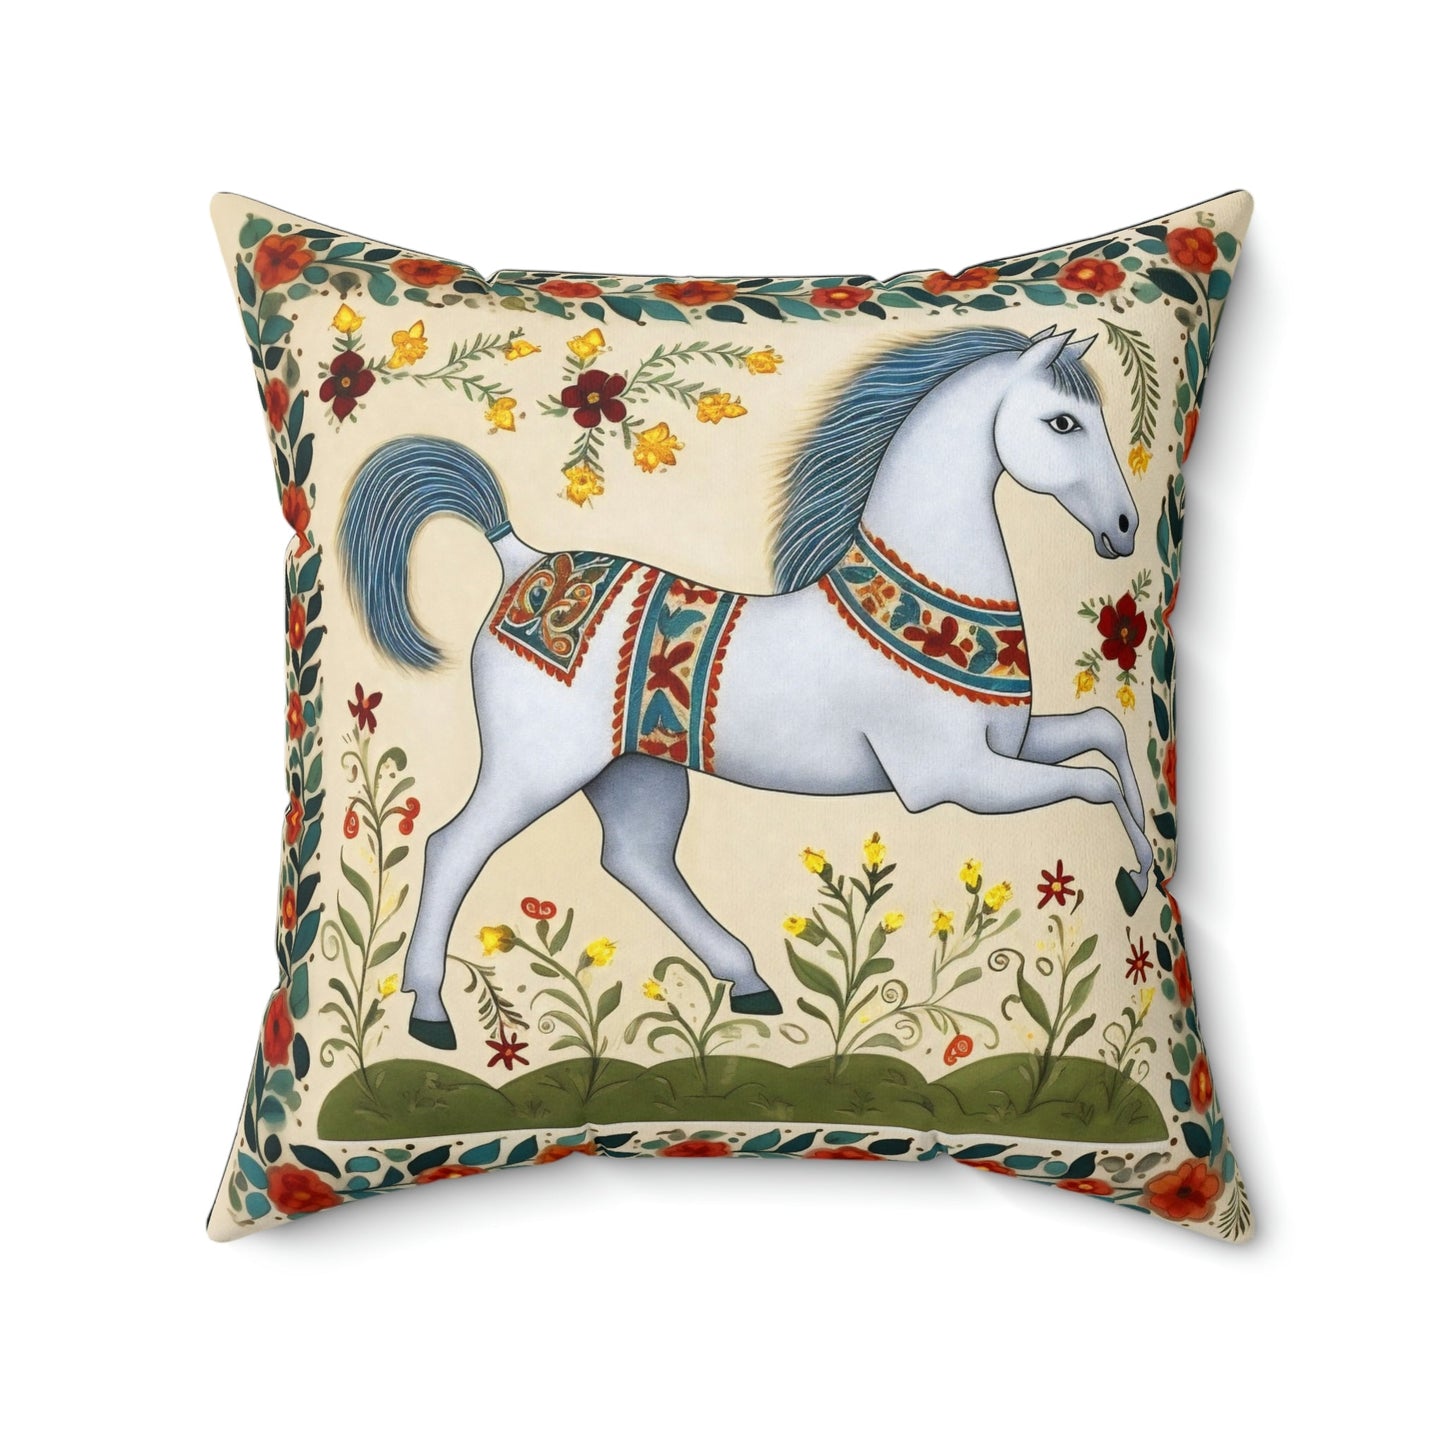 Rustic Folk Art Horse with Border Design Square Pillow - Cottagecore Country Farm Style Gift for Yourself or Loved Ones